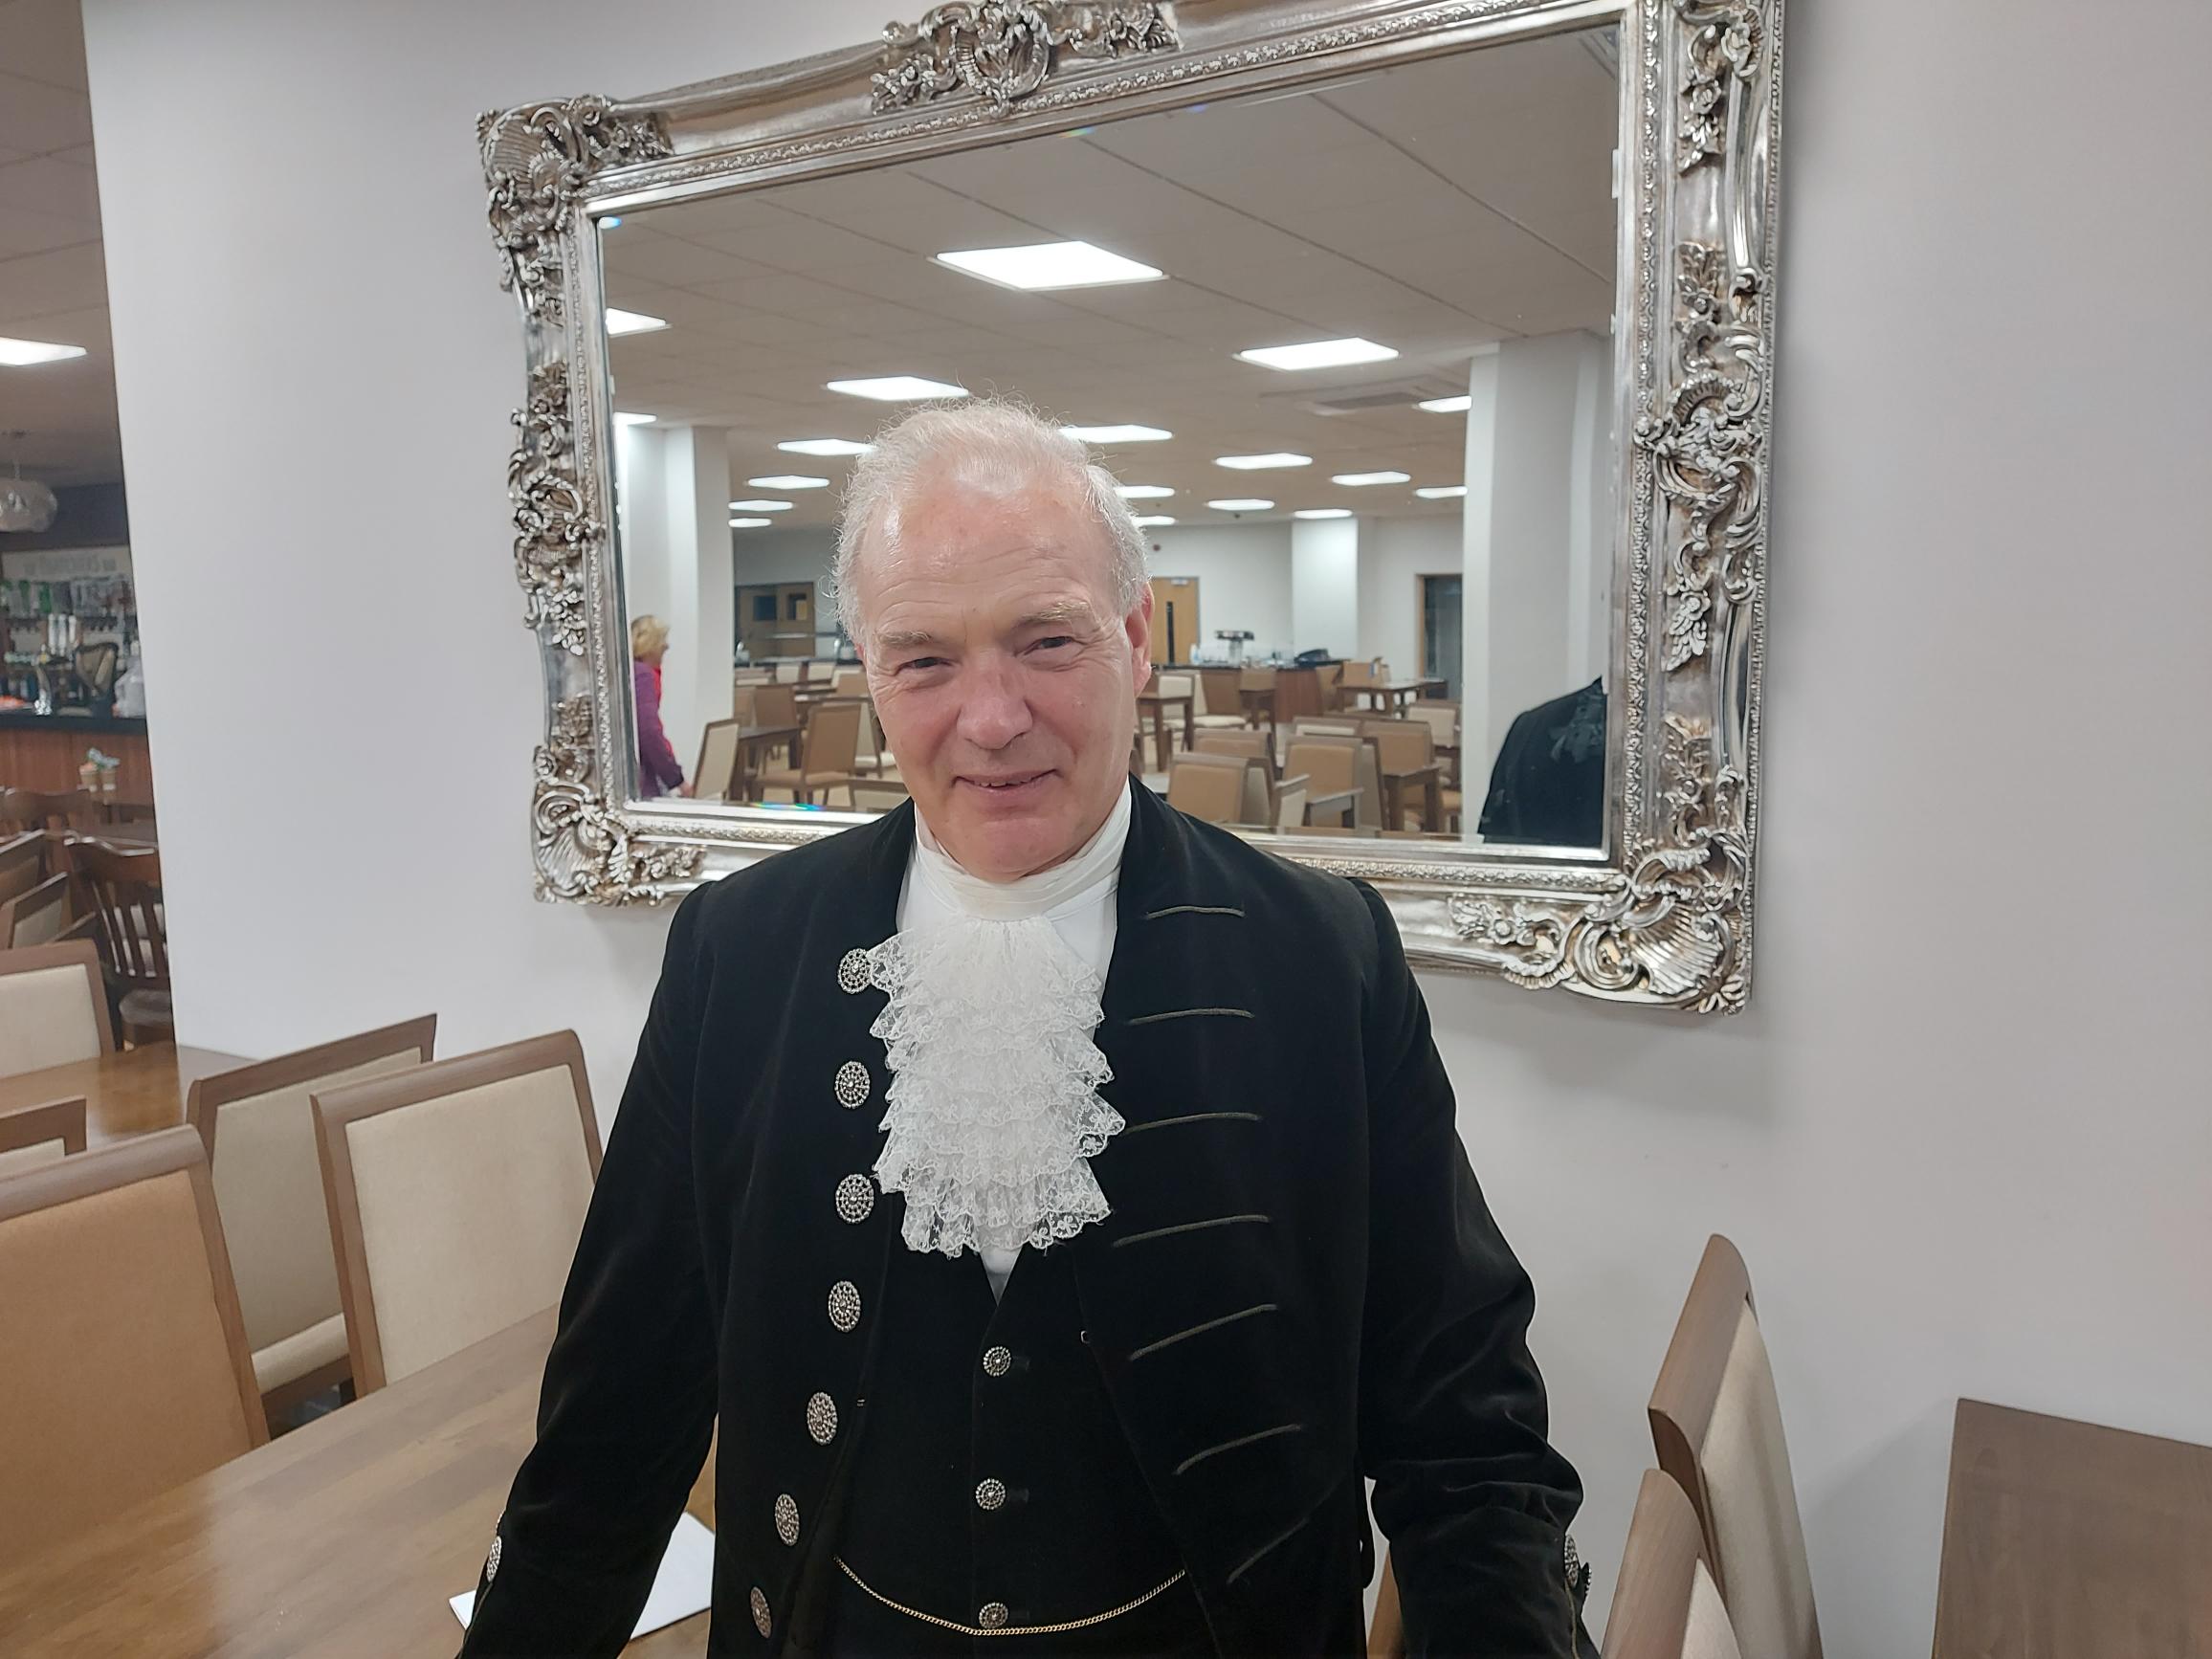 The High Sheriff of Somerset, Robert Drewett, will make the announcement in ceremonial uniform.  Its history dates back to Royal Court dress from the mid-18th century.